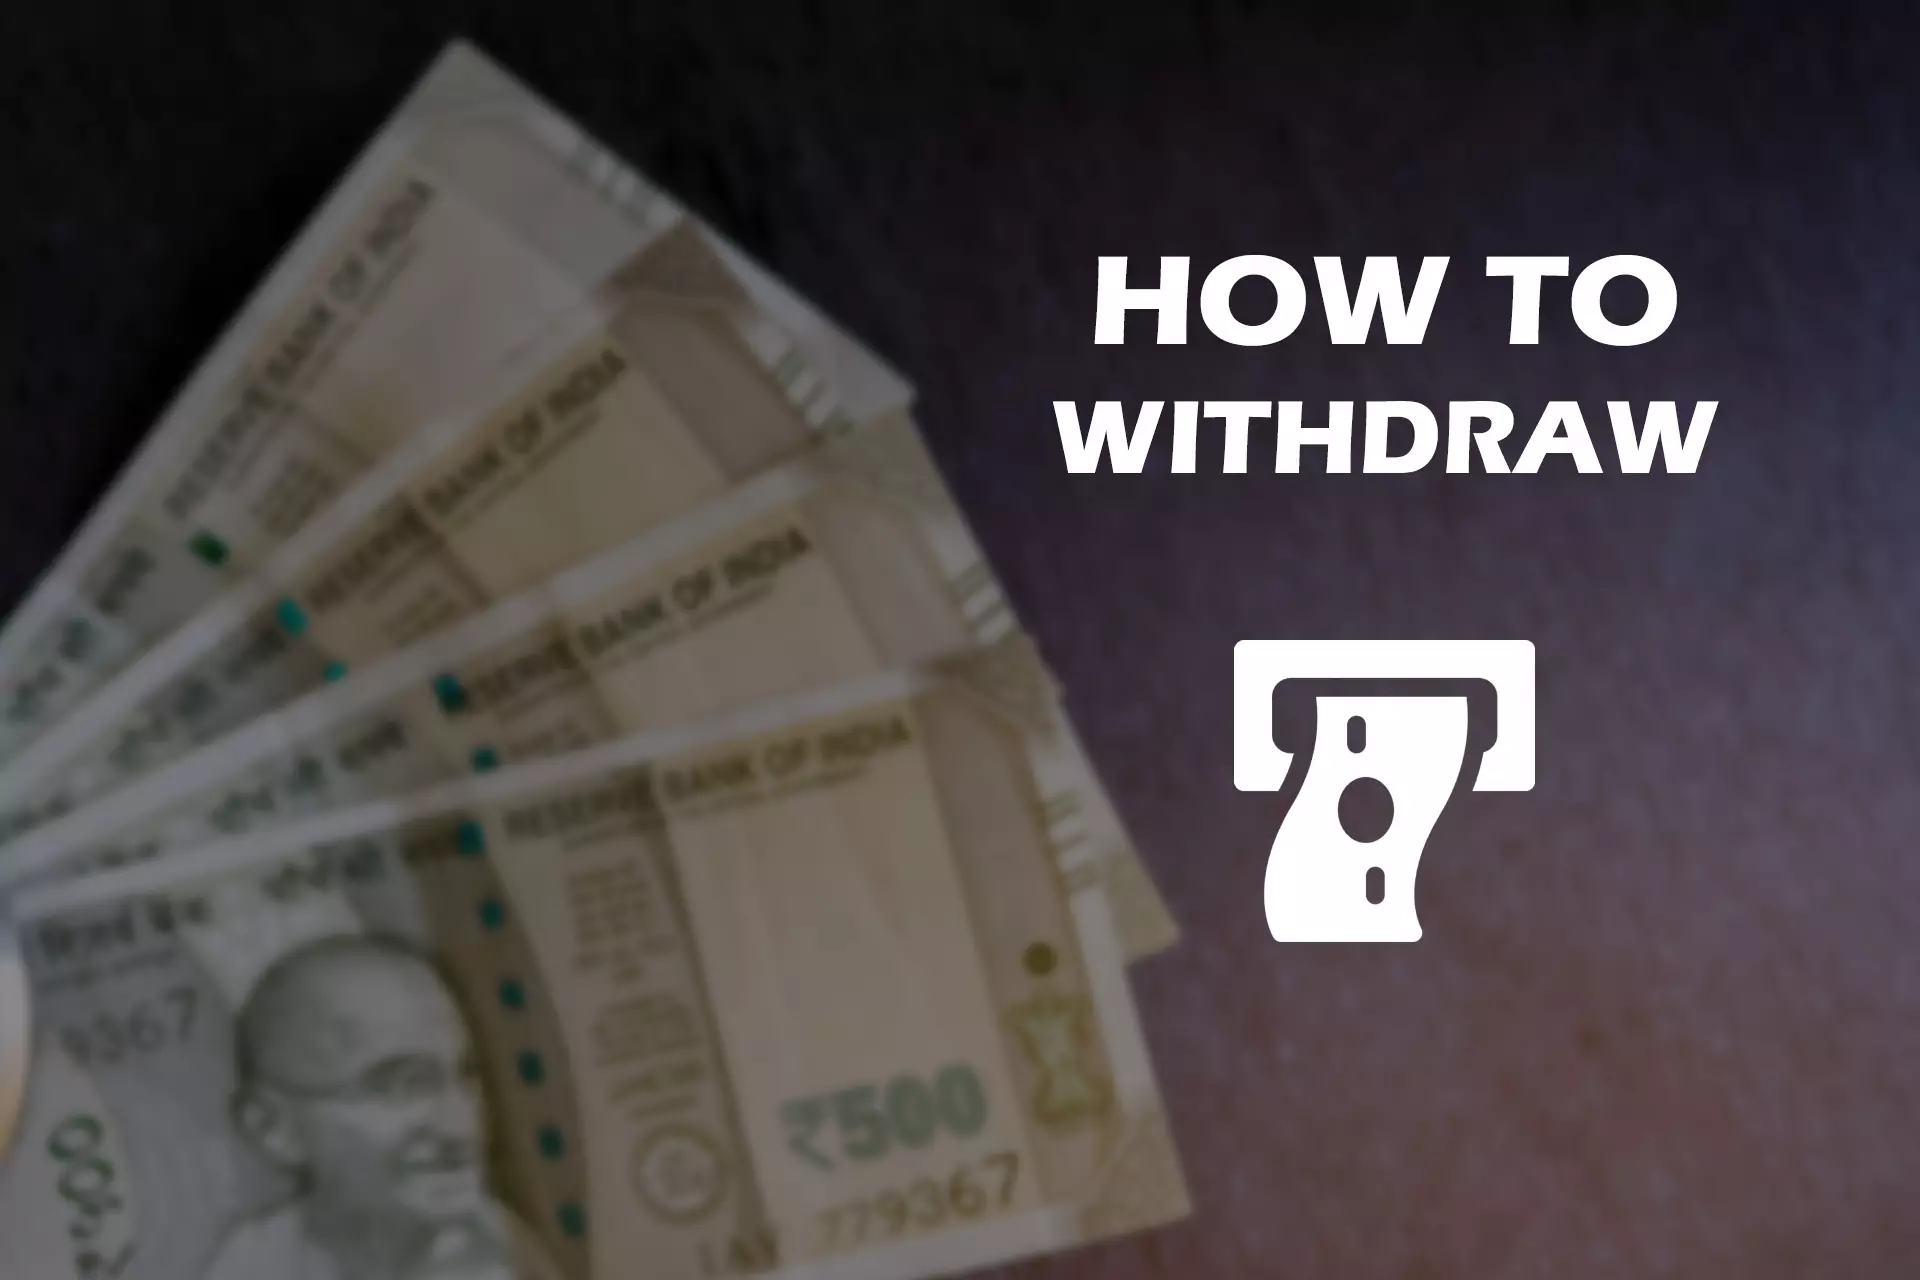 Users can withdraw money from their betting accounts to bank cards directly.